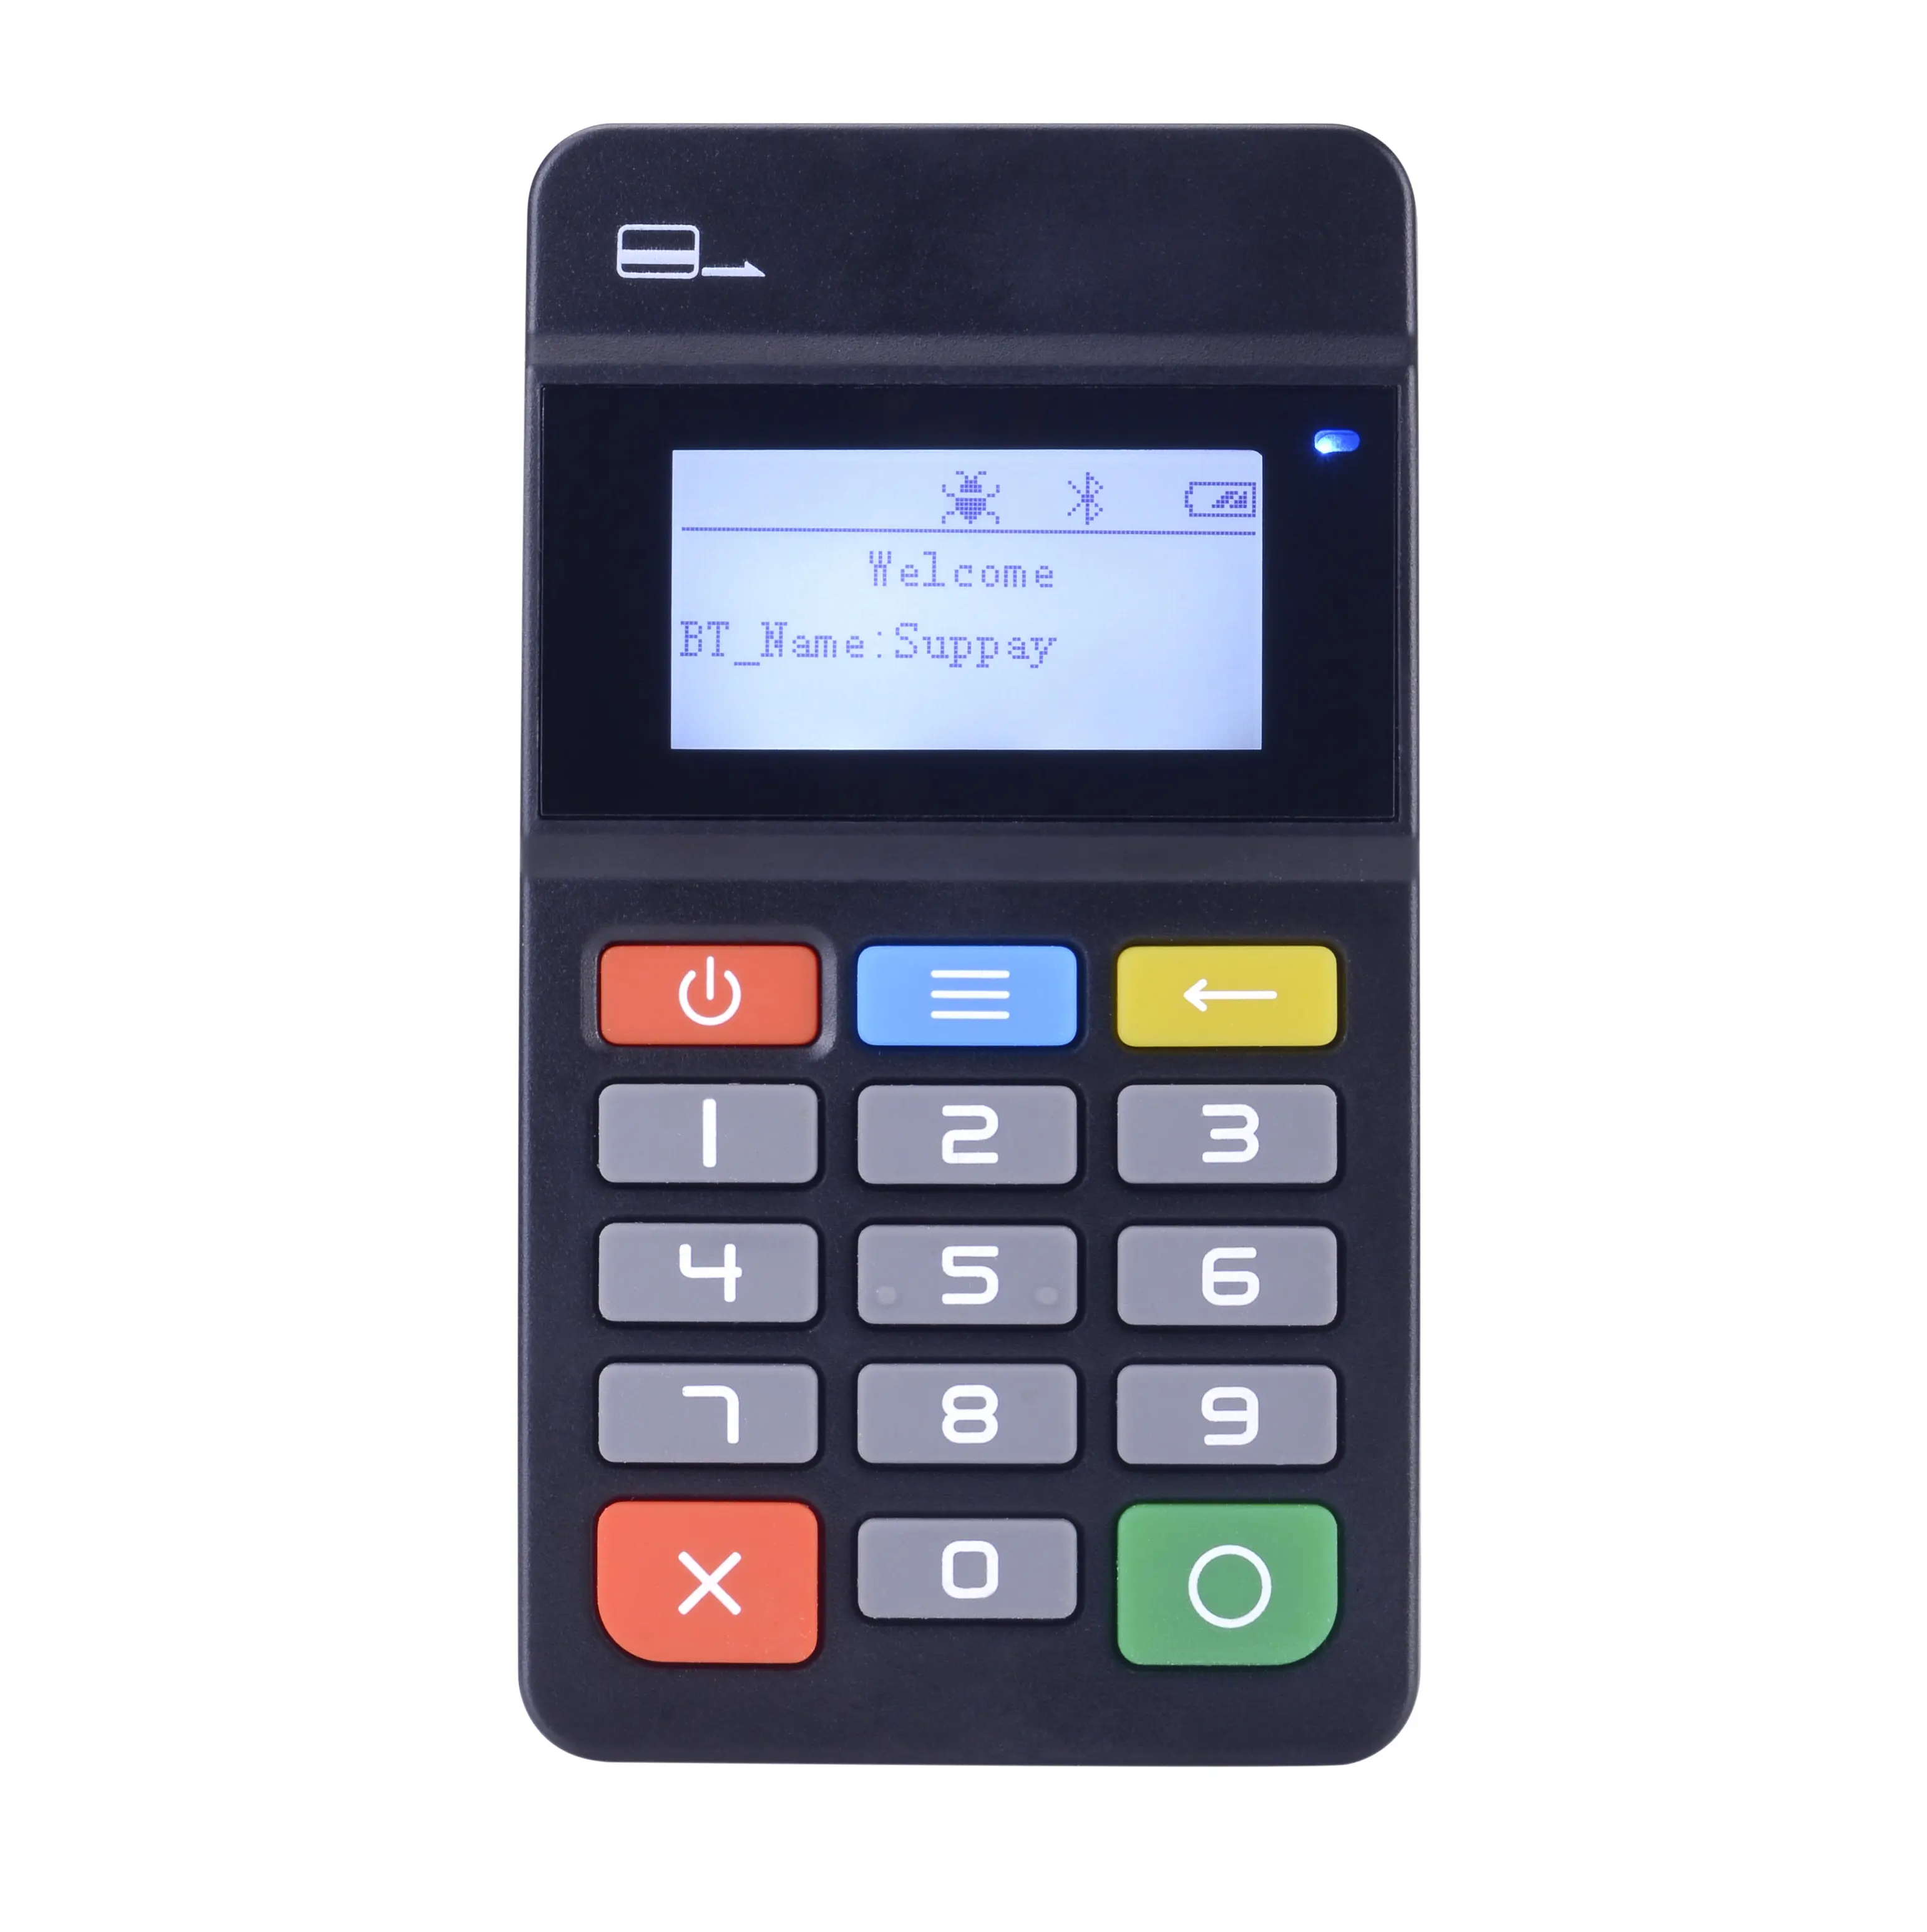 Keypad Keyboard Credit Chip Card Reader Writer Mpos With MPOS Approved USB Connection MSR NFC System